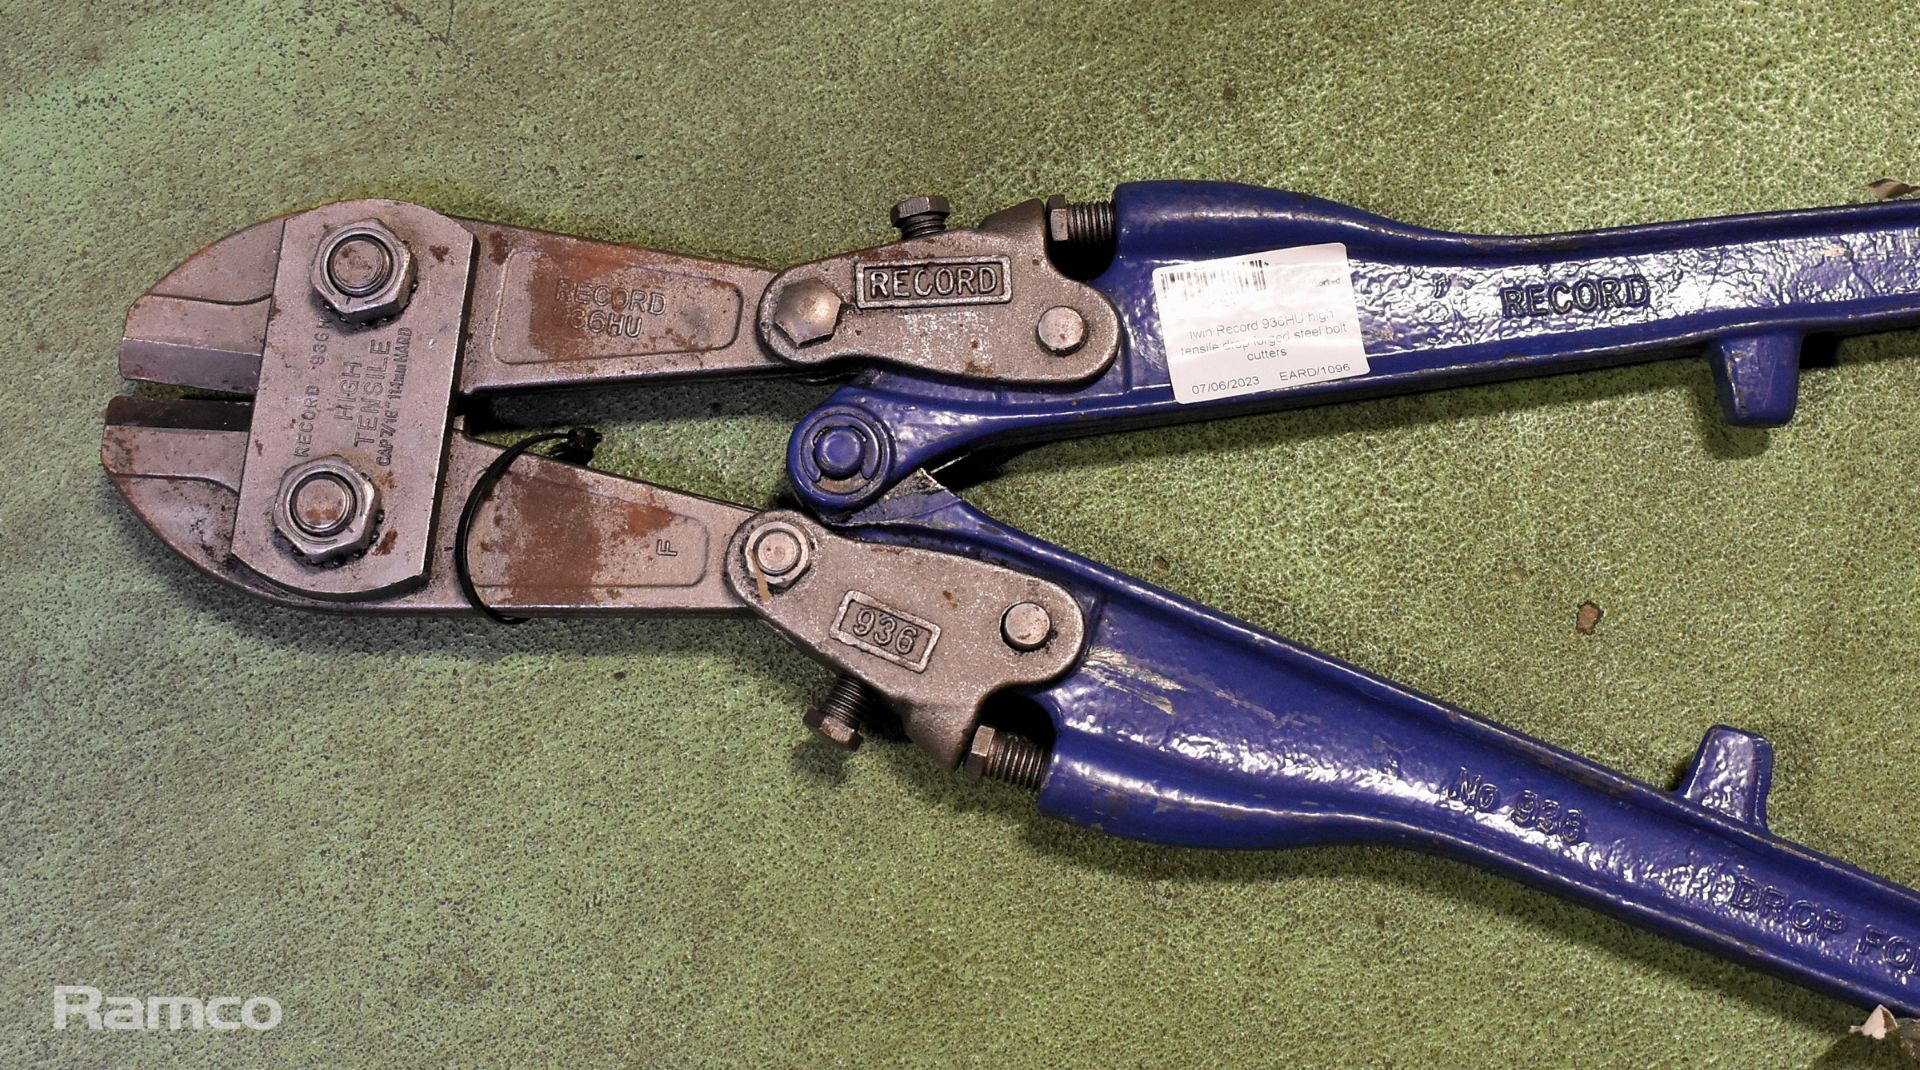 Irwin Record 936HU high tensile drop forged steel bolt cutters - Image 2 of 3